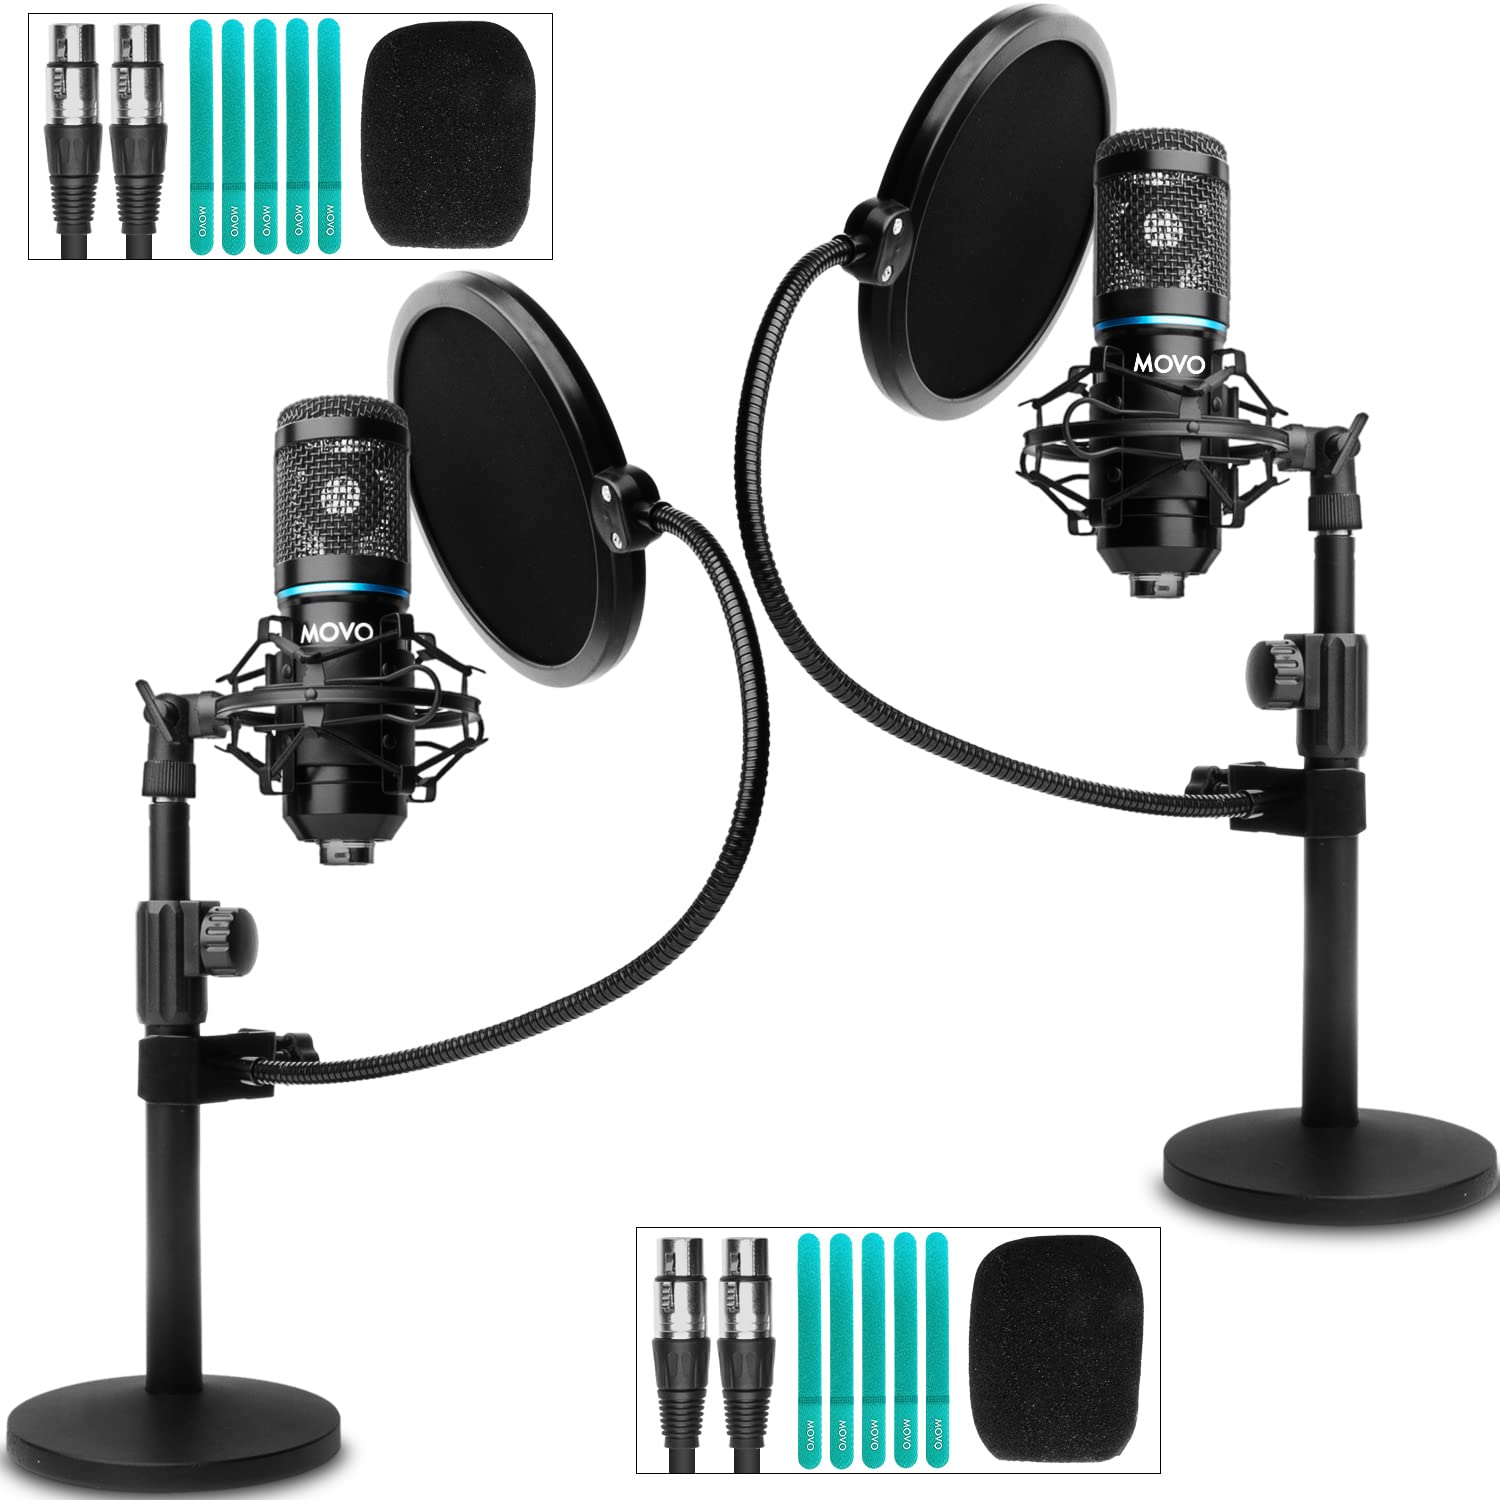 Movo PodPak2T 2-Pack Universal XLR Condenser Microphone Podcasting Equipment Bundle for 2 - Includes 2 Cardioid Mics, Desktop Stands, Shock Mounts, Pop Filters and Cables - Podcast and YouTube Kit  - Acceptable